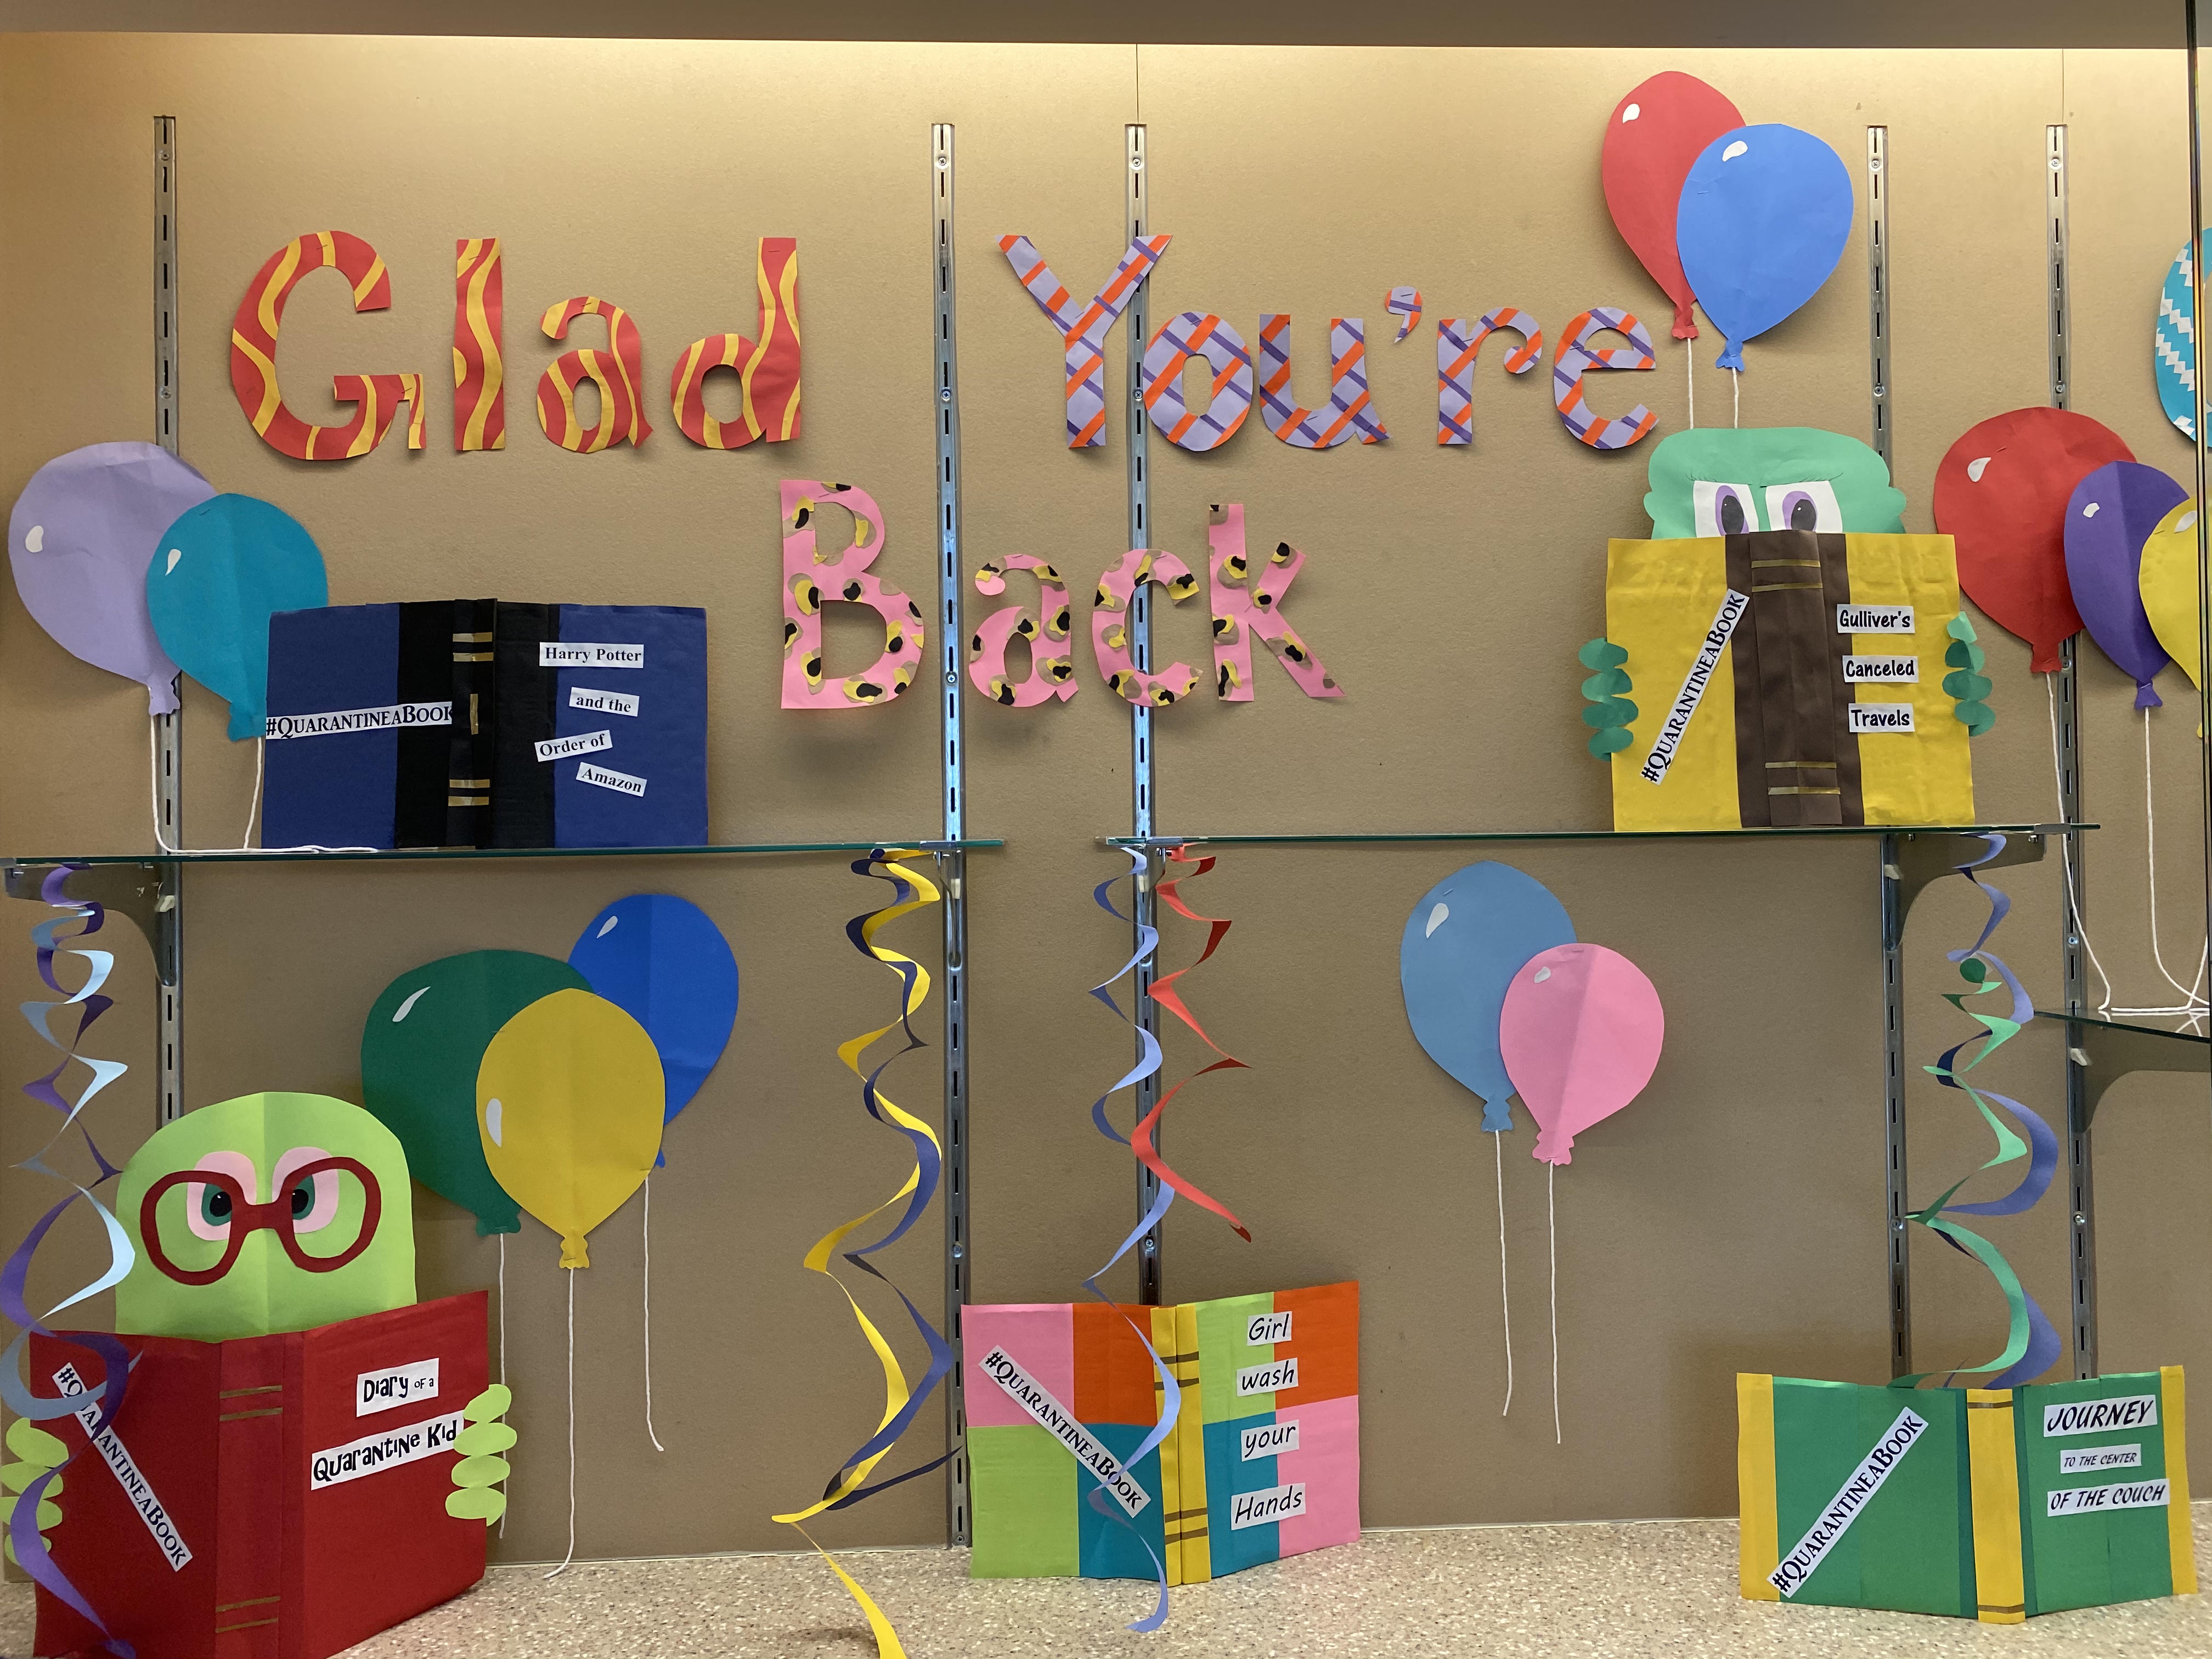 Display case filled with paper cut out decorations: Balloons, letters spelling Glad You're Back, bookworms, and books